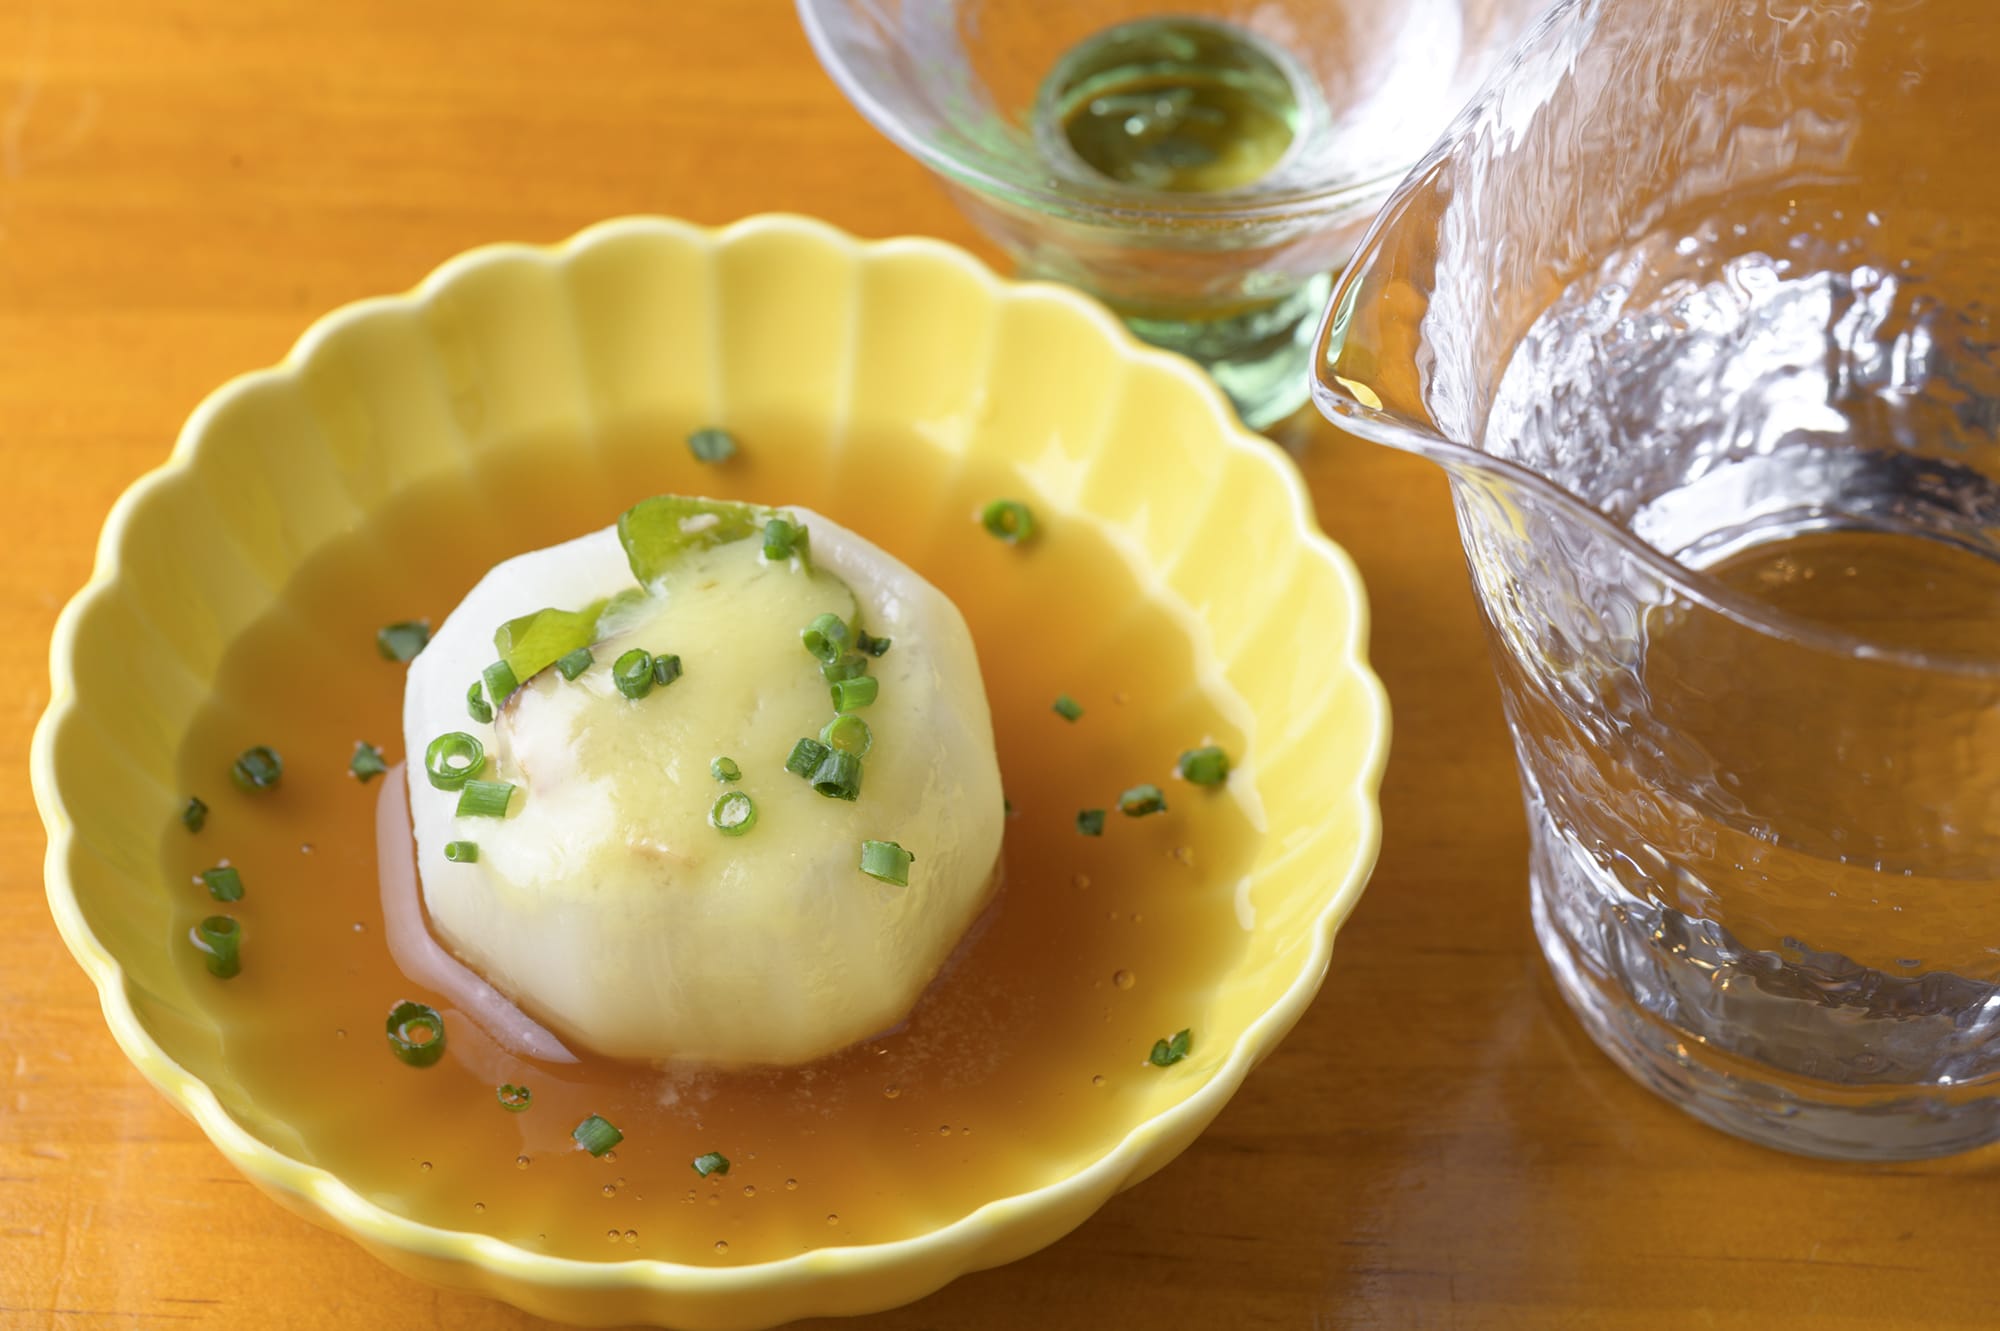 The soft steamed turnip covered with toromian (thick starchy sauce) and dashi-shoyu (soup stock and soy sauce) is served for the steamed dish.